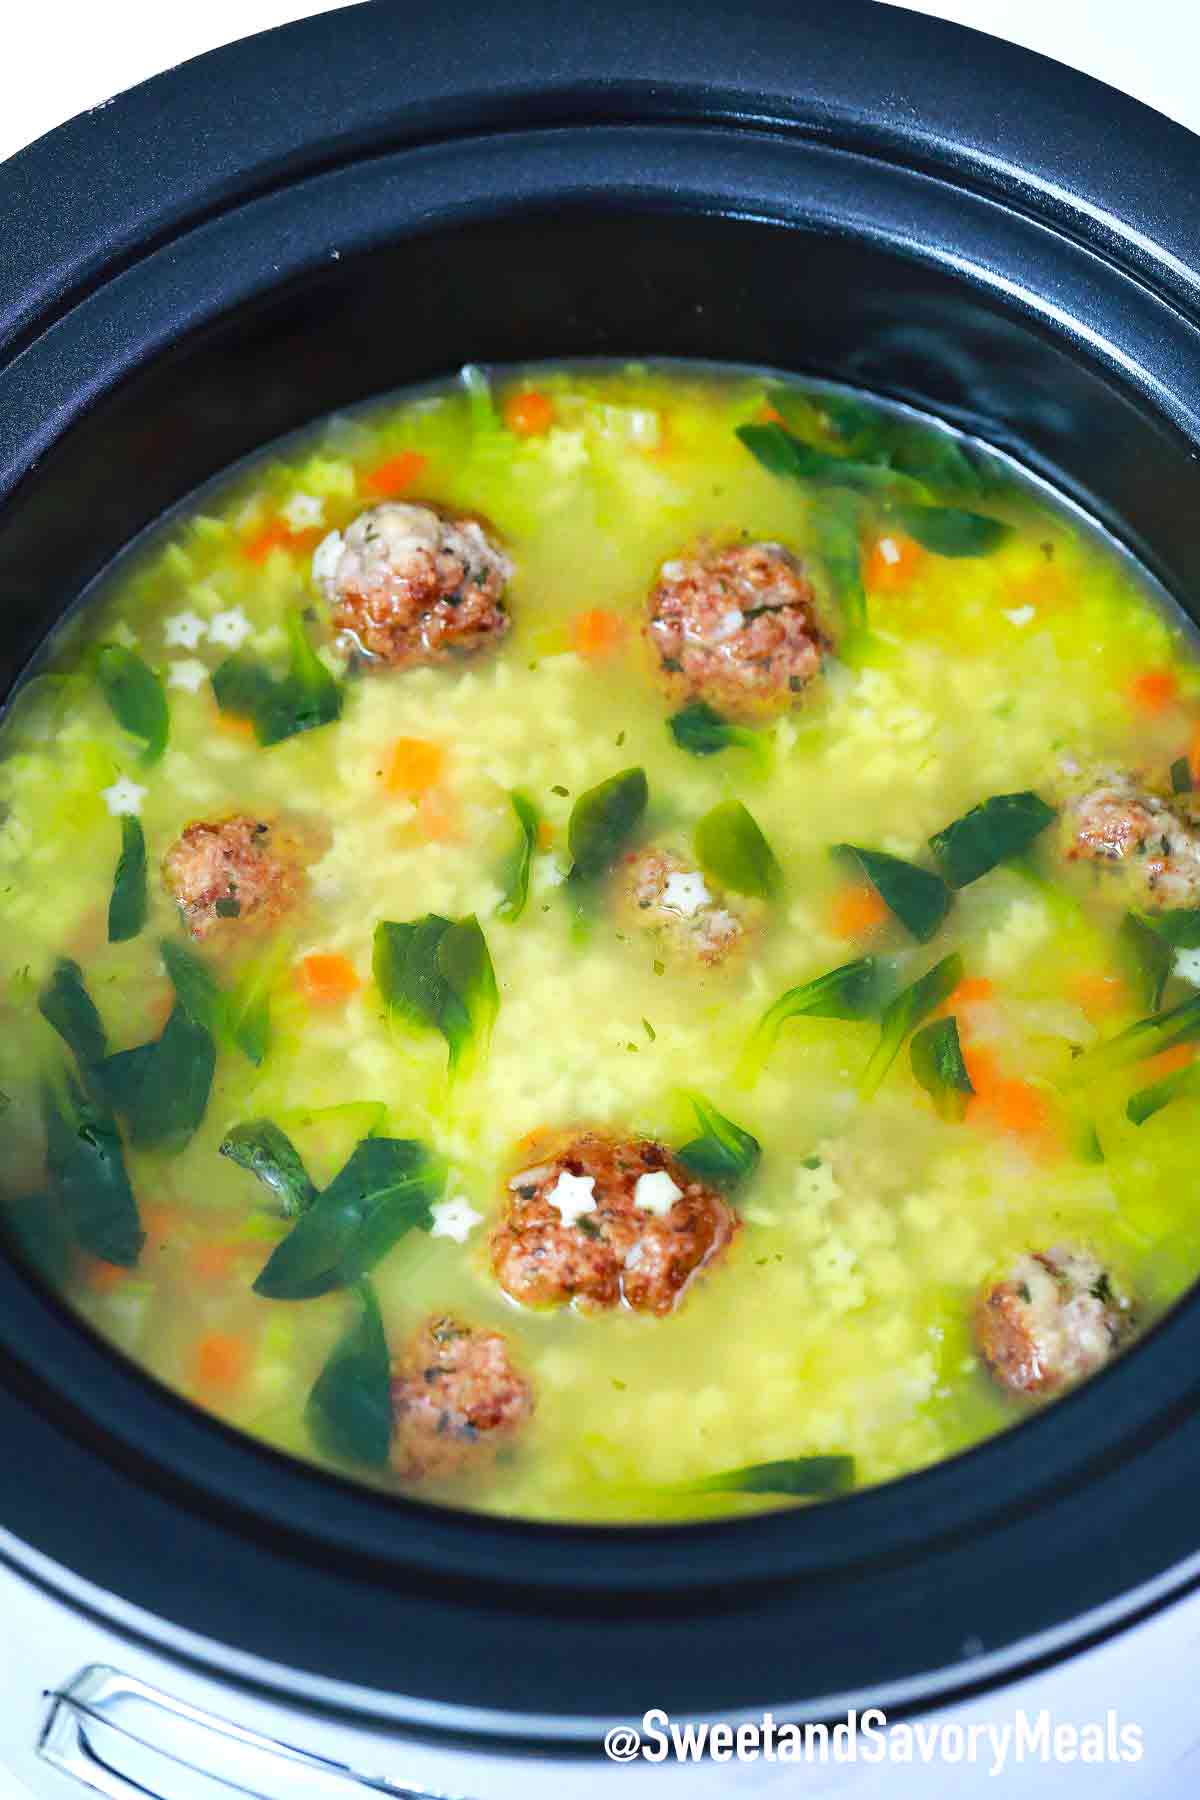 Slow Cooker Italian Wedding Soup - Sweet and Savory Meals